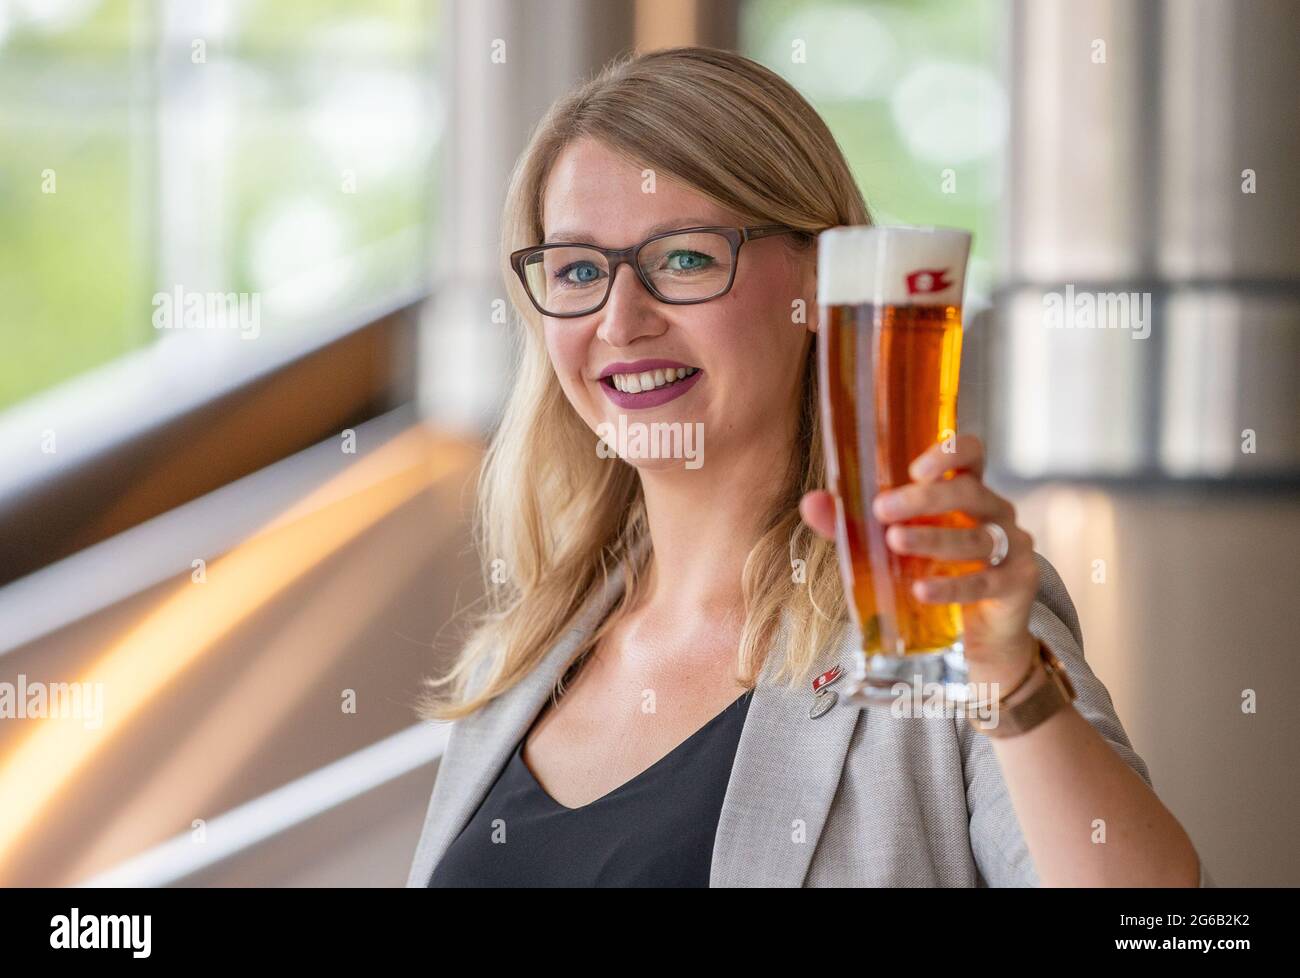 Stralsund, Germany. 30th June, 2021. Elisa Raus, the reigning world champion beer sommelier, stands with a glass of beer in the brewhouse at Störtebeker Braumanufaktur. At the 2019 World Championships in Rimini, Italy, she beat off assembled competition from 19 nations. Due to the Corona pandemic, Raus may also be the longest reigning world champion. Credit: Jens Büttner/dpa-Zentralbild/dpa/Alamy Live News Stock Photo